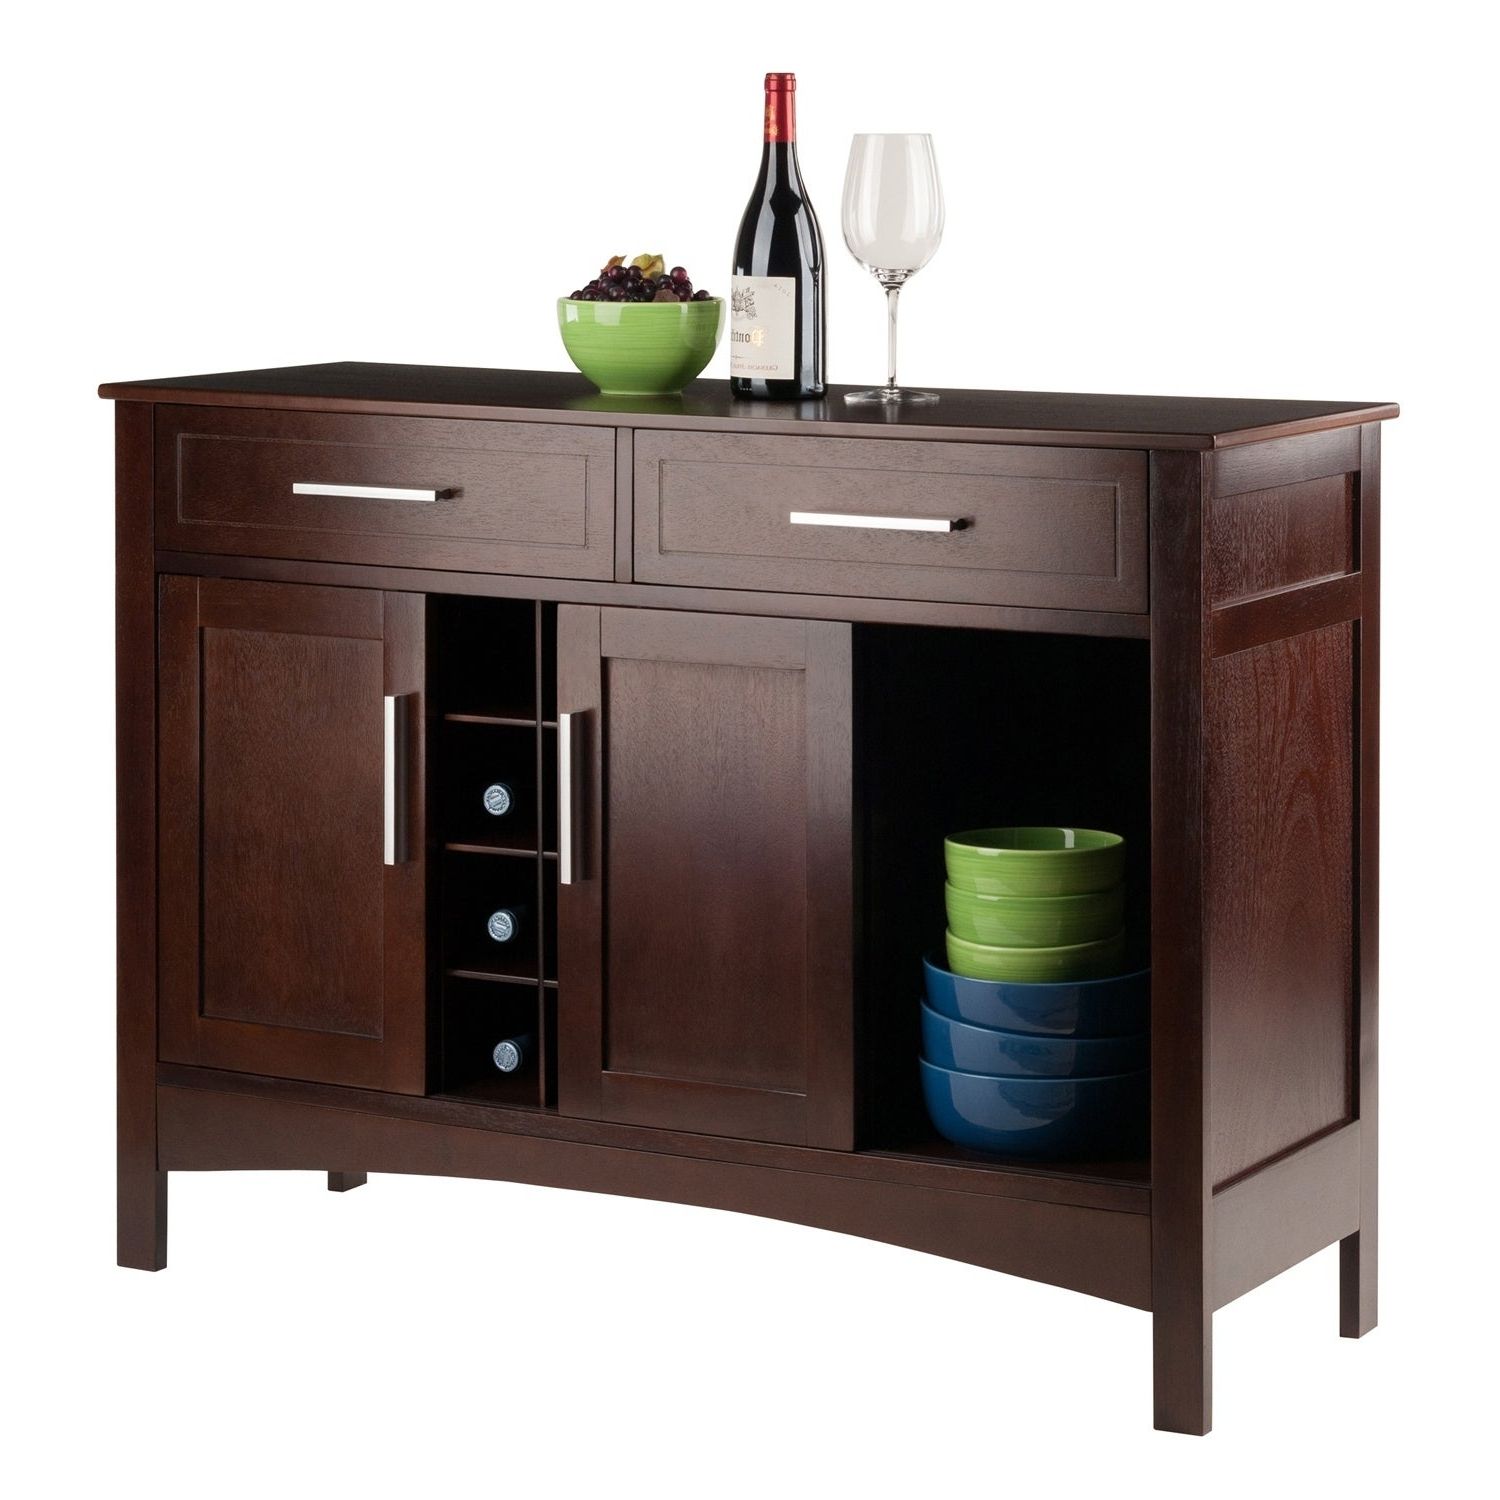 Winsome Gordon Solid And Composite Wood Buffet Cabinet/sideboard In  Cappuccino Finish For Solid And Composite Wood Buffets In Cappuccino Finish (Gallery 1 of 20)